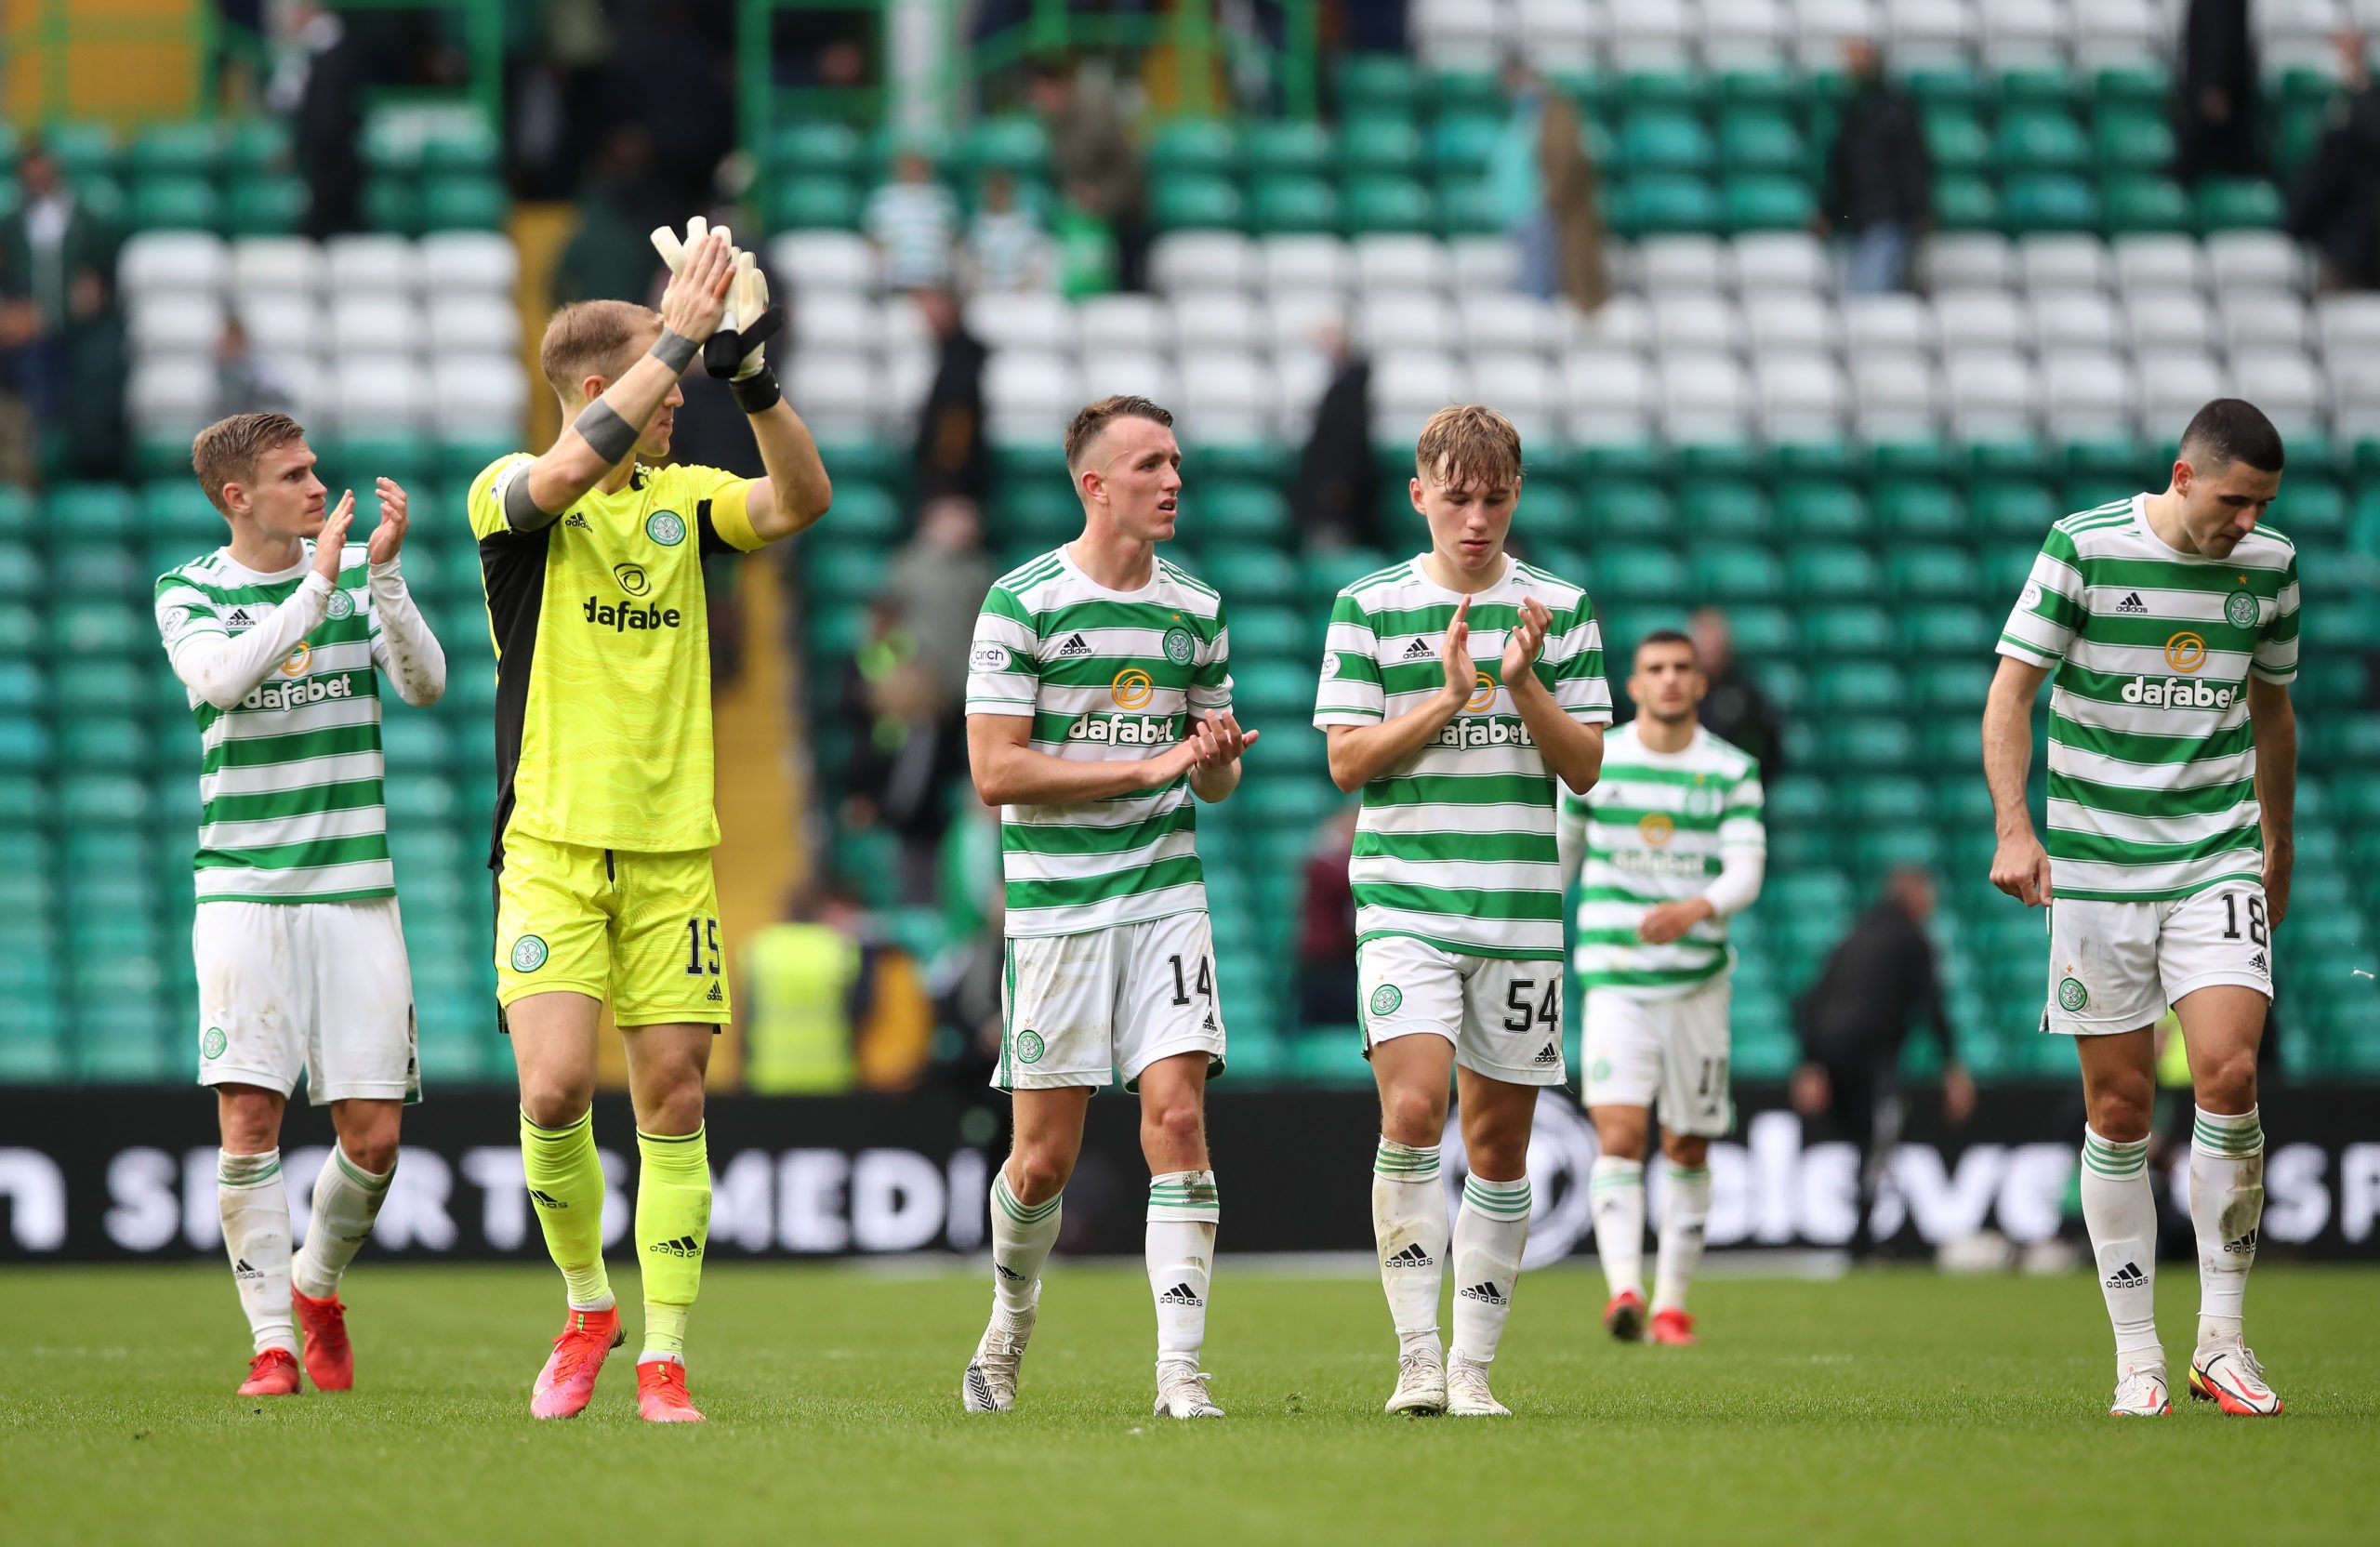 Celtic players applauding the fans